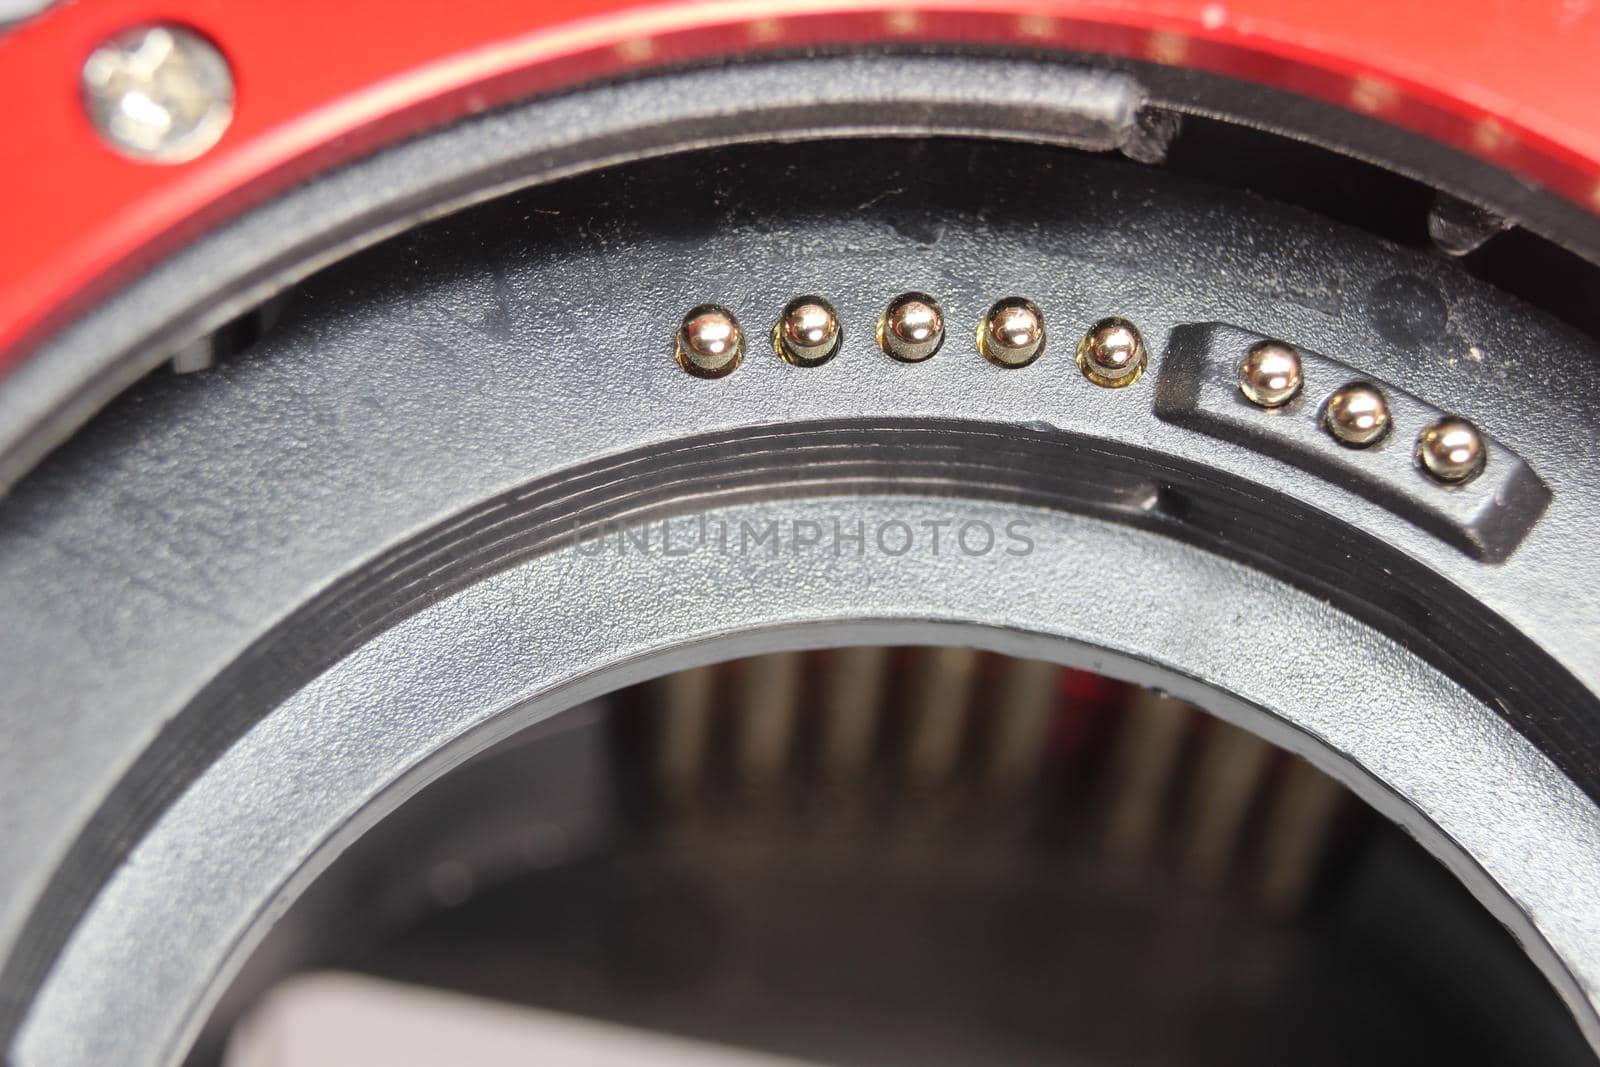 Extension tubes for camera lens to perform macro photography by Photochowk